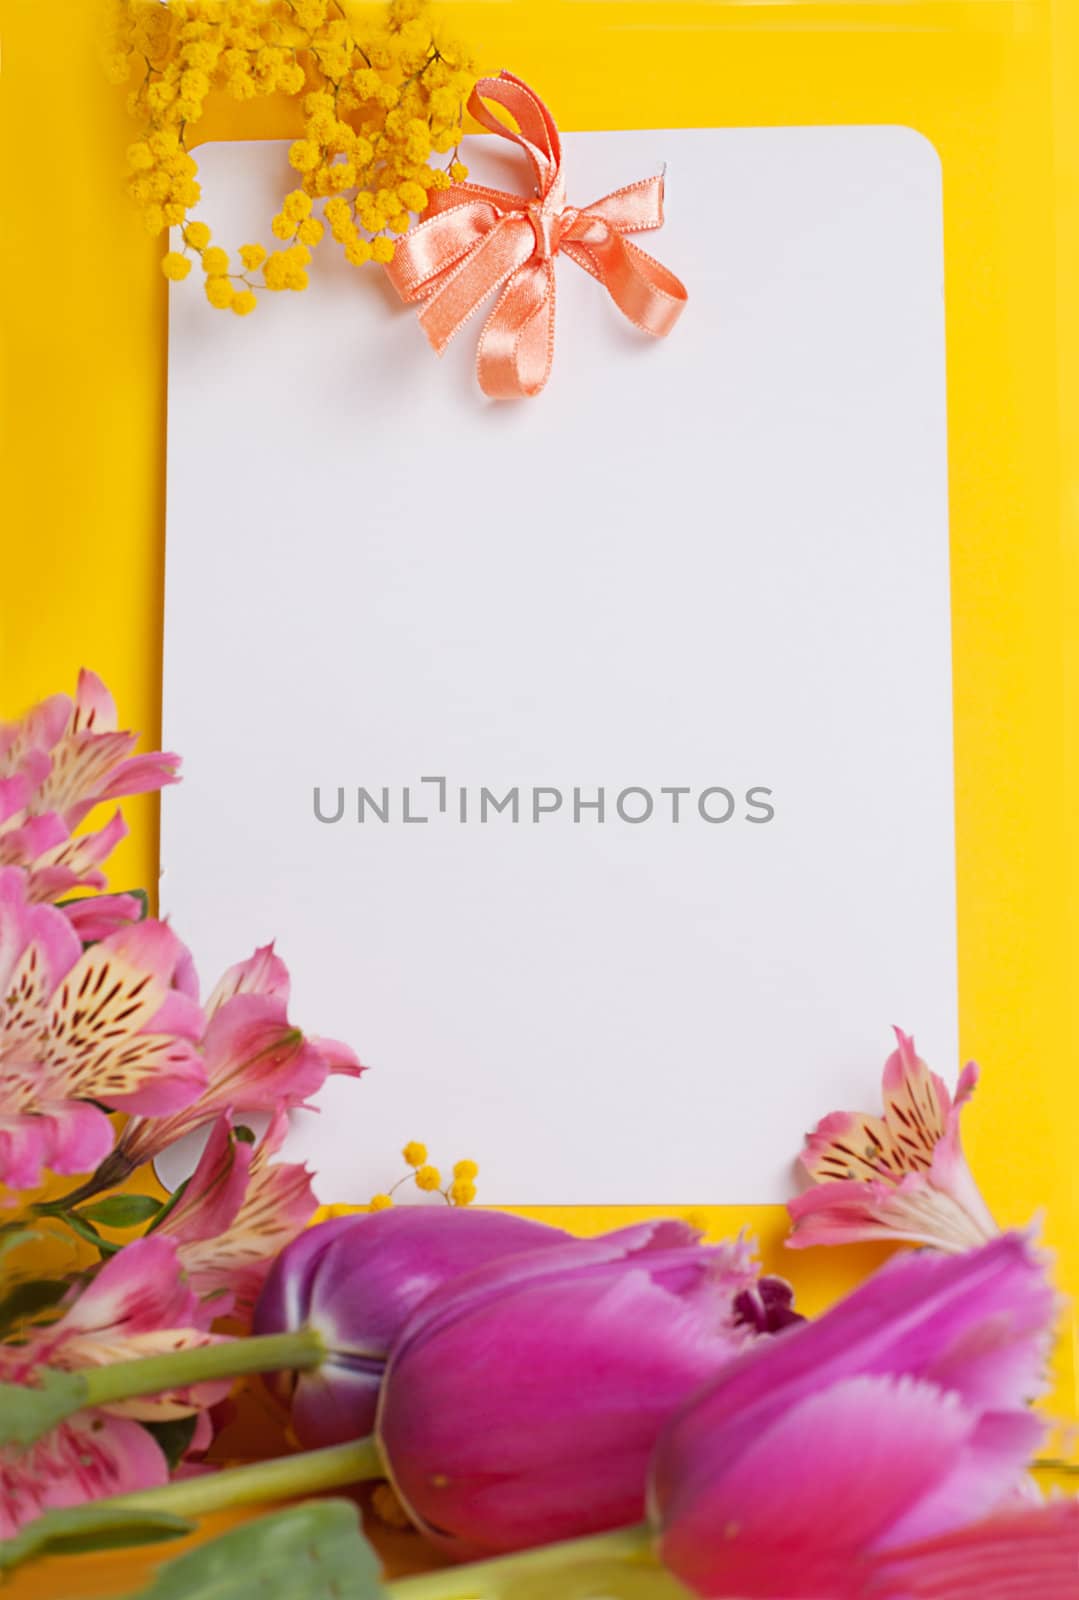 Decorative card with mimosa and tulips on white